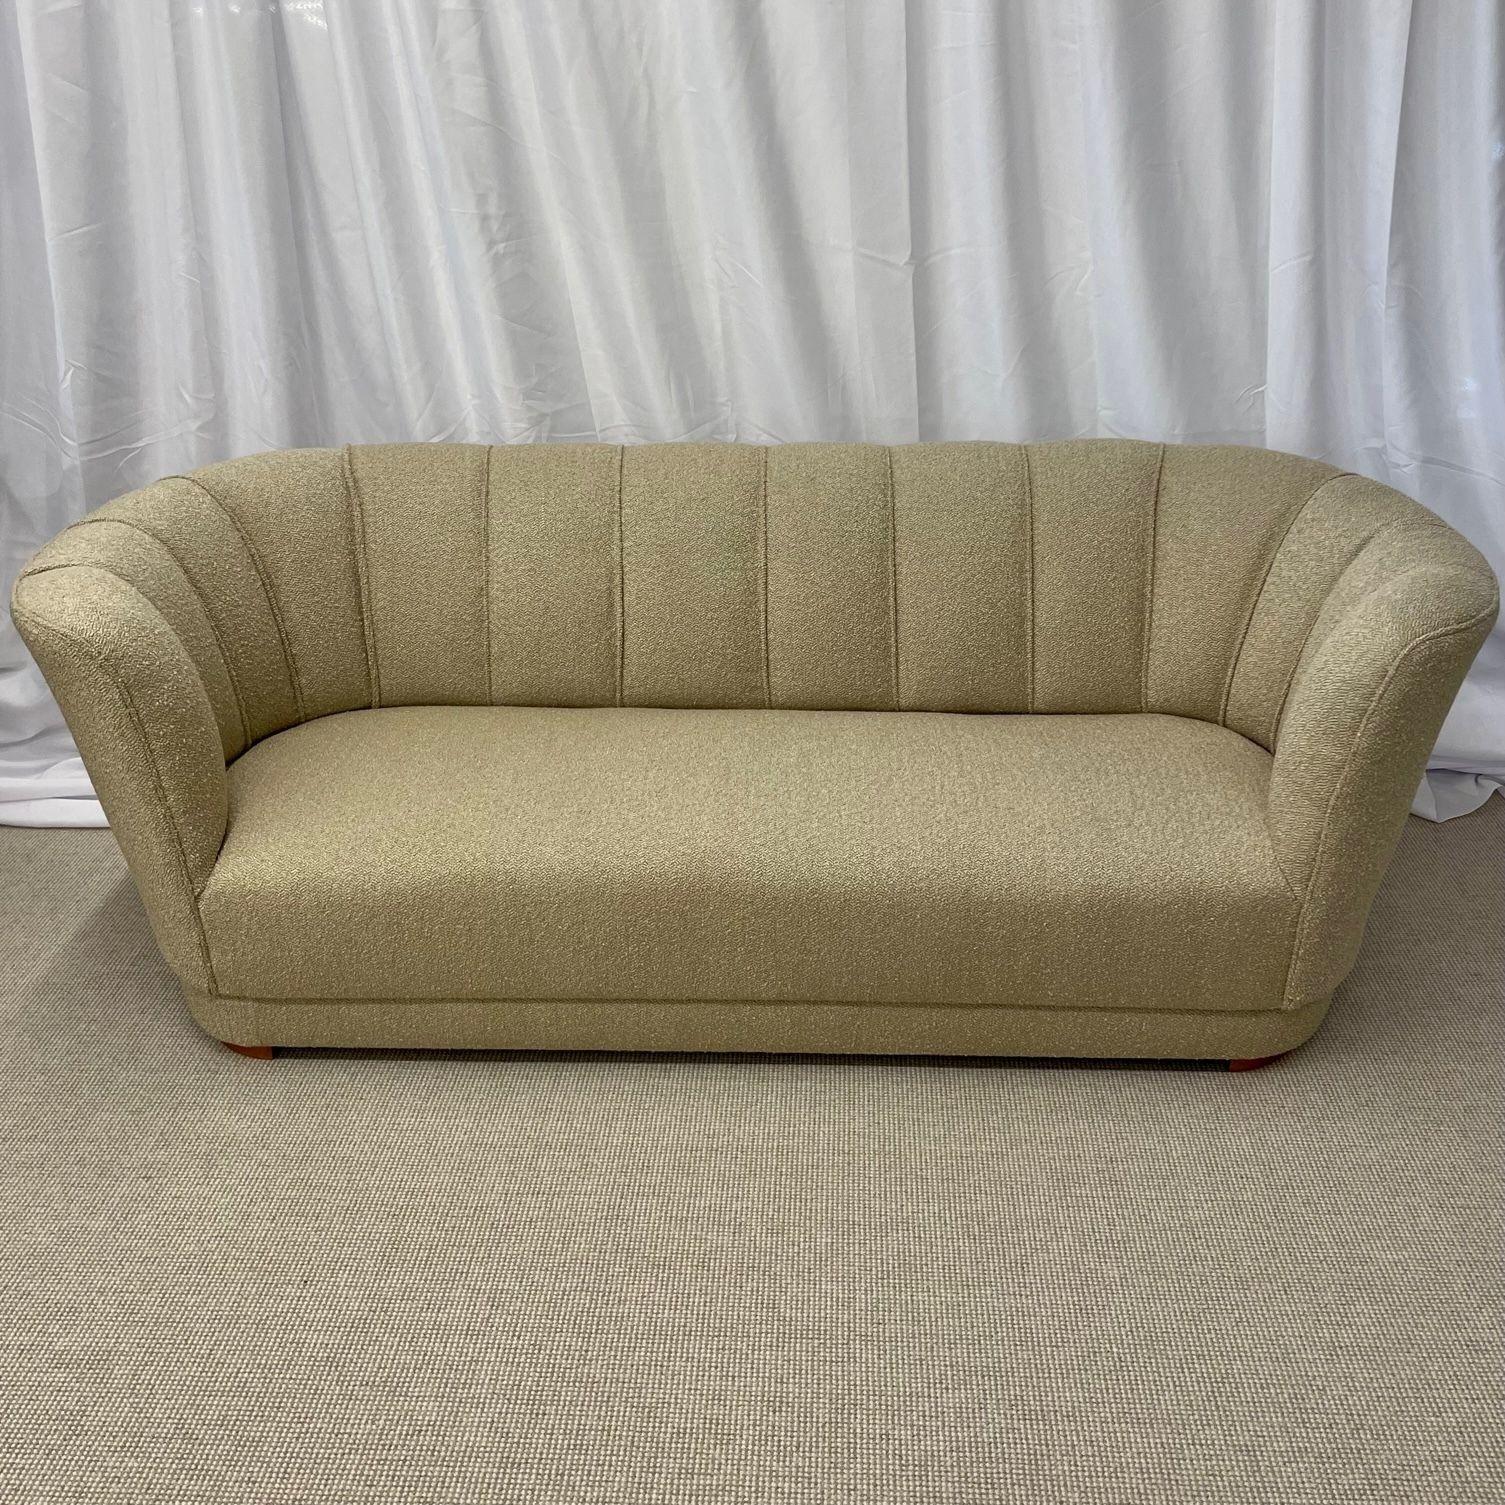 Flemming Lassen Style, Danish Cabinetmaker, Mid-Century Modern, Curved Sofa, Beige Boucle, 1940s

Beautifly organic shaped Danish sofa similar to works by Flemming Lassen. This sofa features a newly upholstered upper in a warm, beige nubby boucle